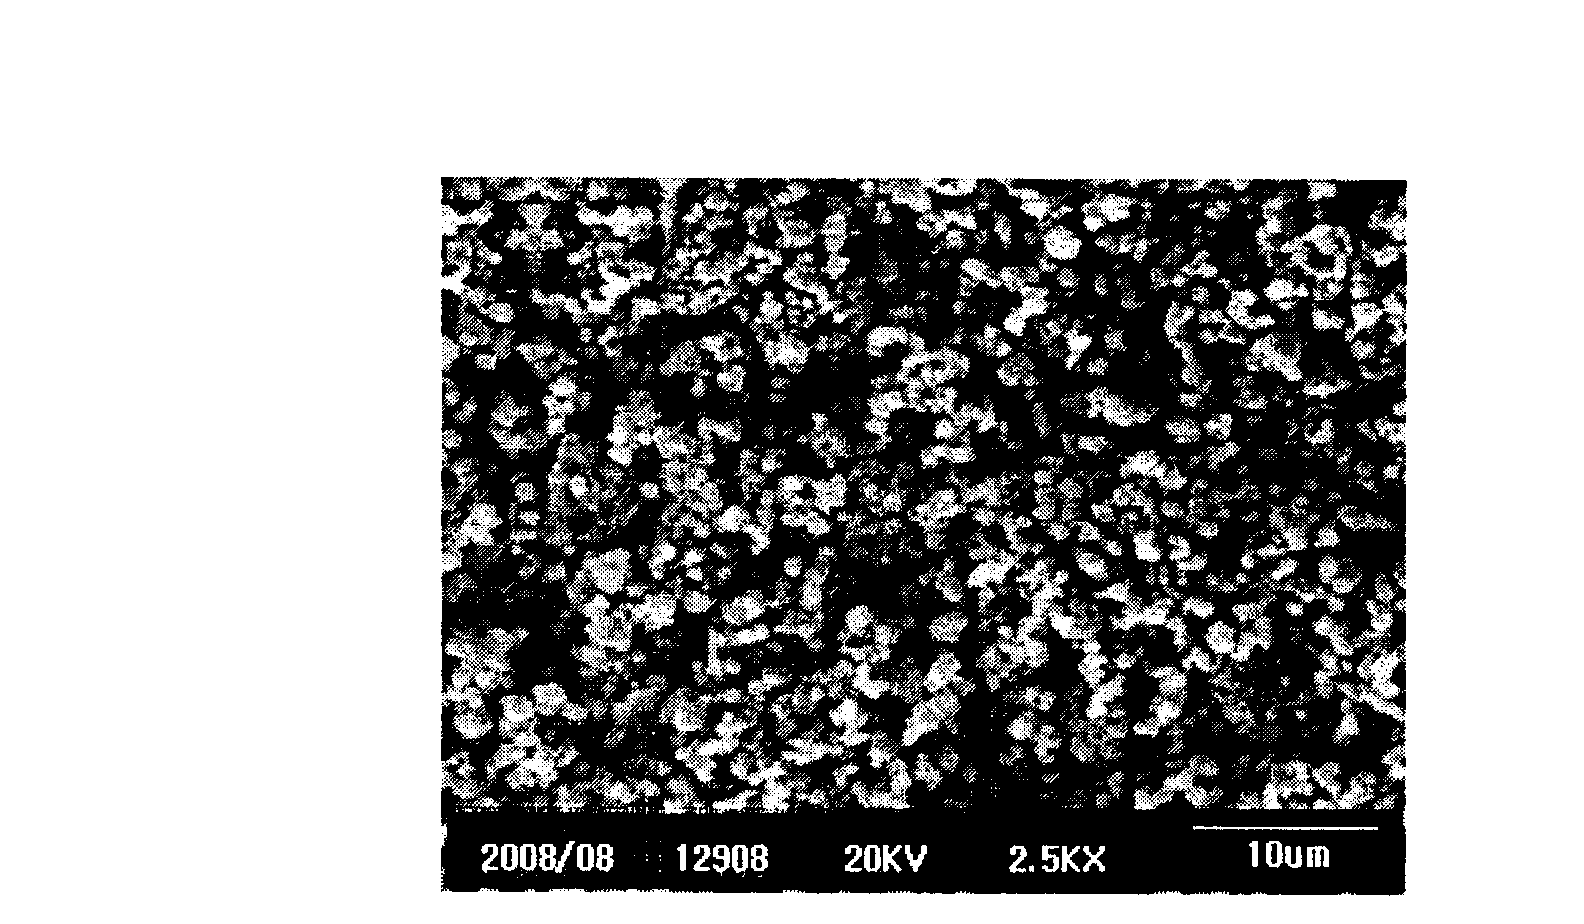 Method for preparing metal-silver-doped carbon-covering lithium iron phosphate of lithium-ion battery cathode material